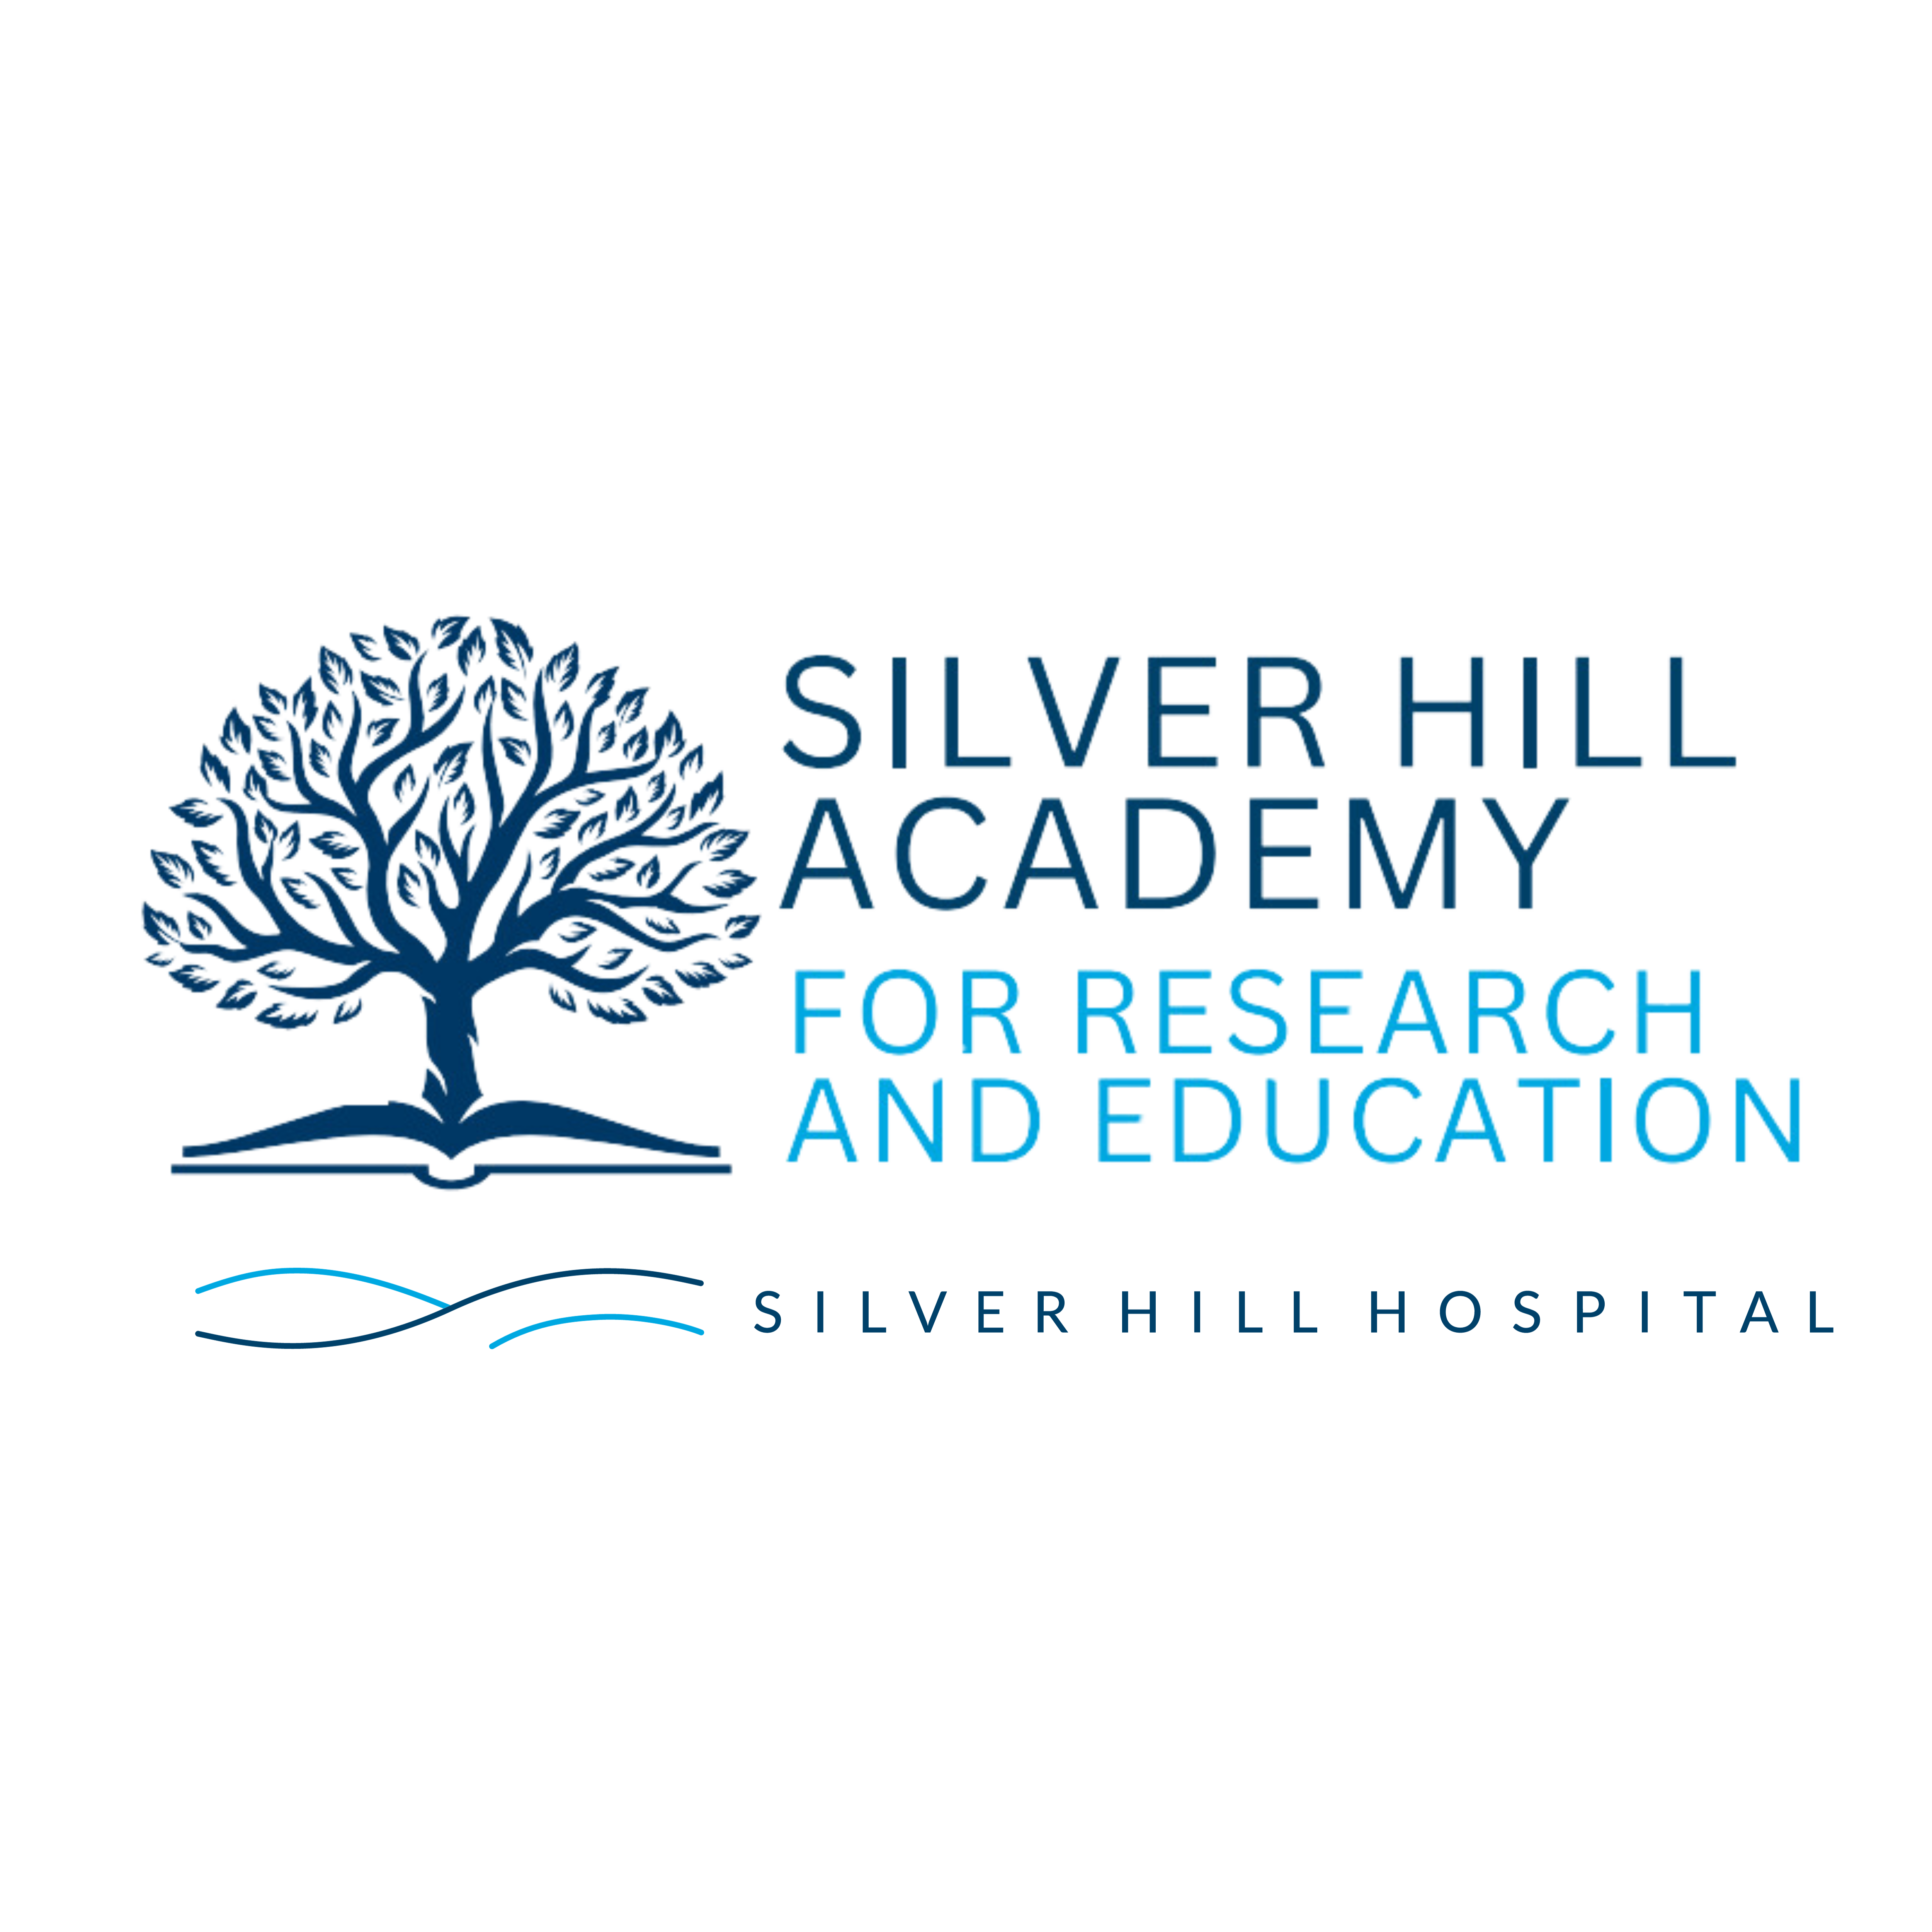 Silverhill Academy for Research and Education